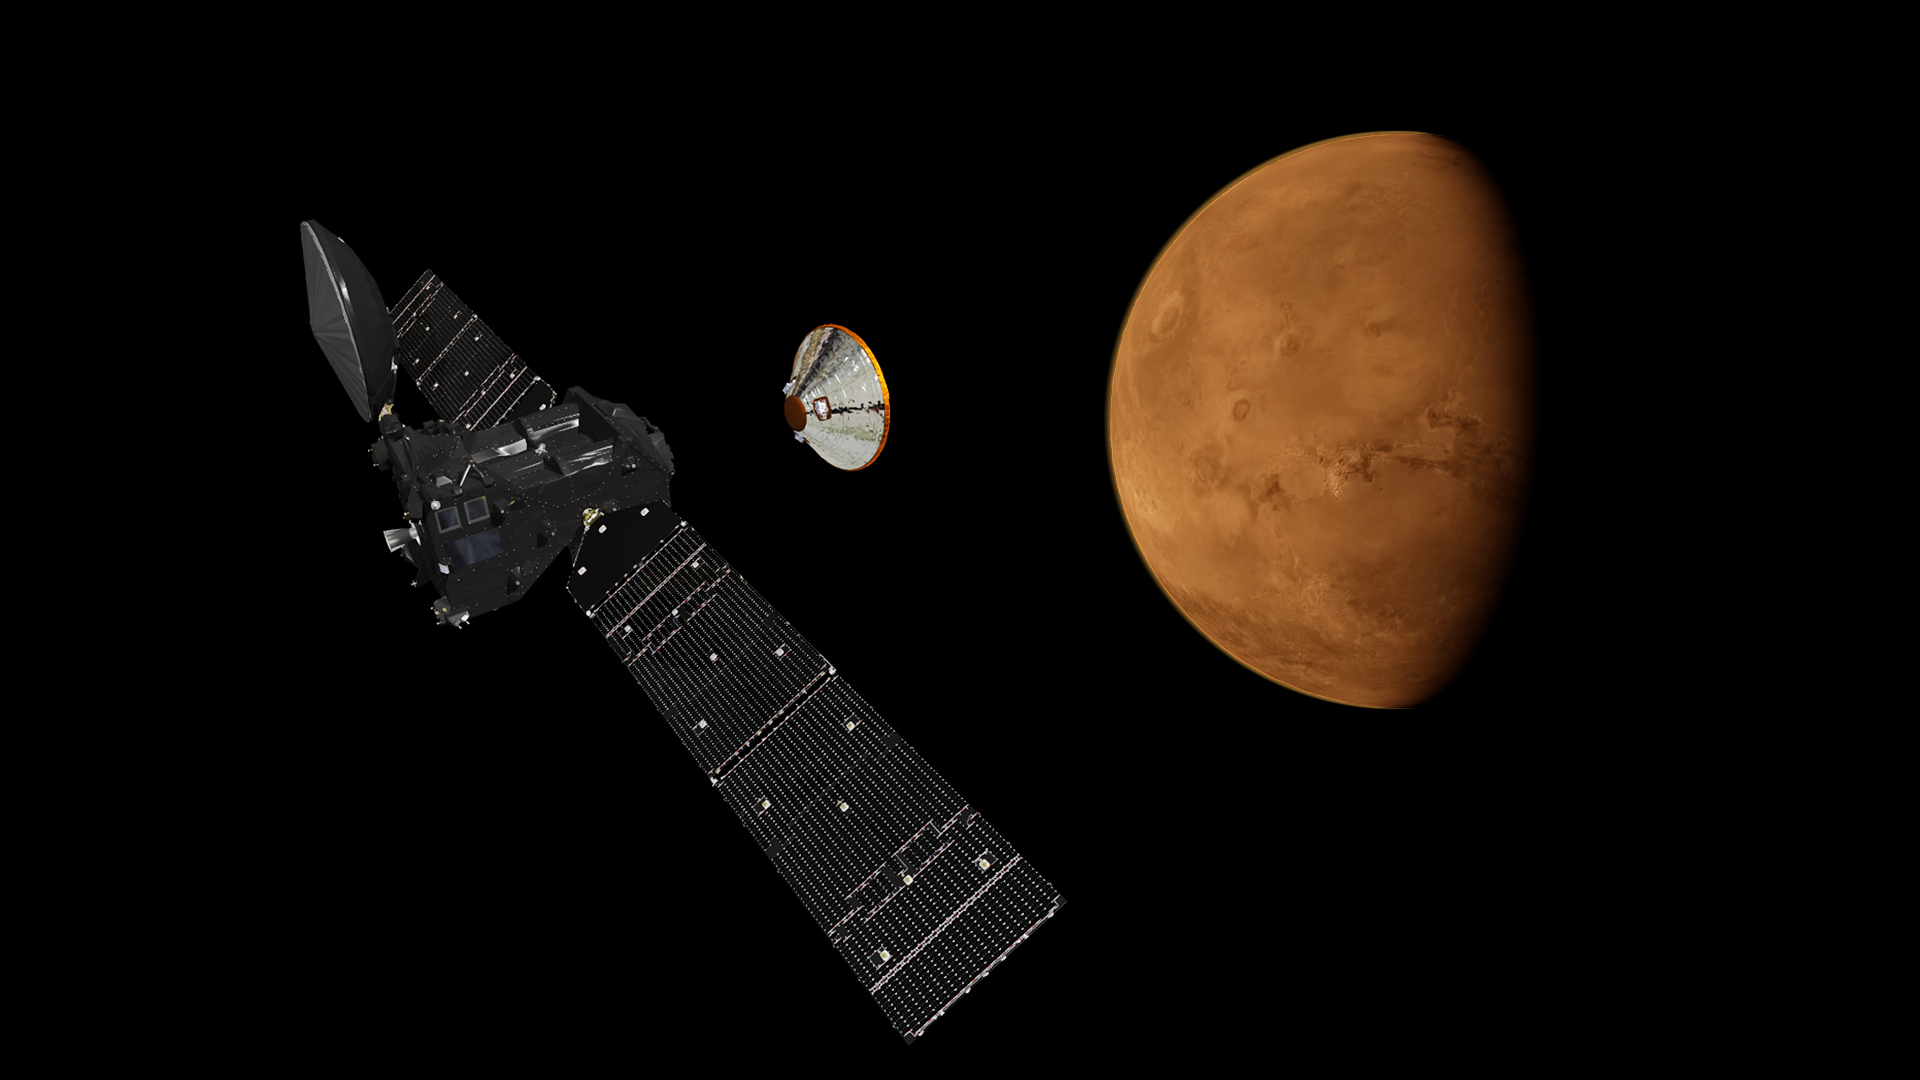 The Science of ExoMars: New Mission to Hunt for Mars Life